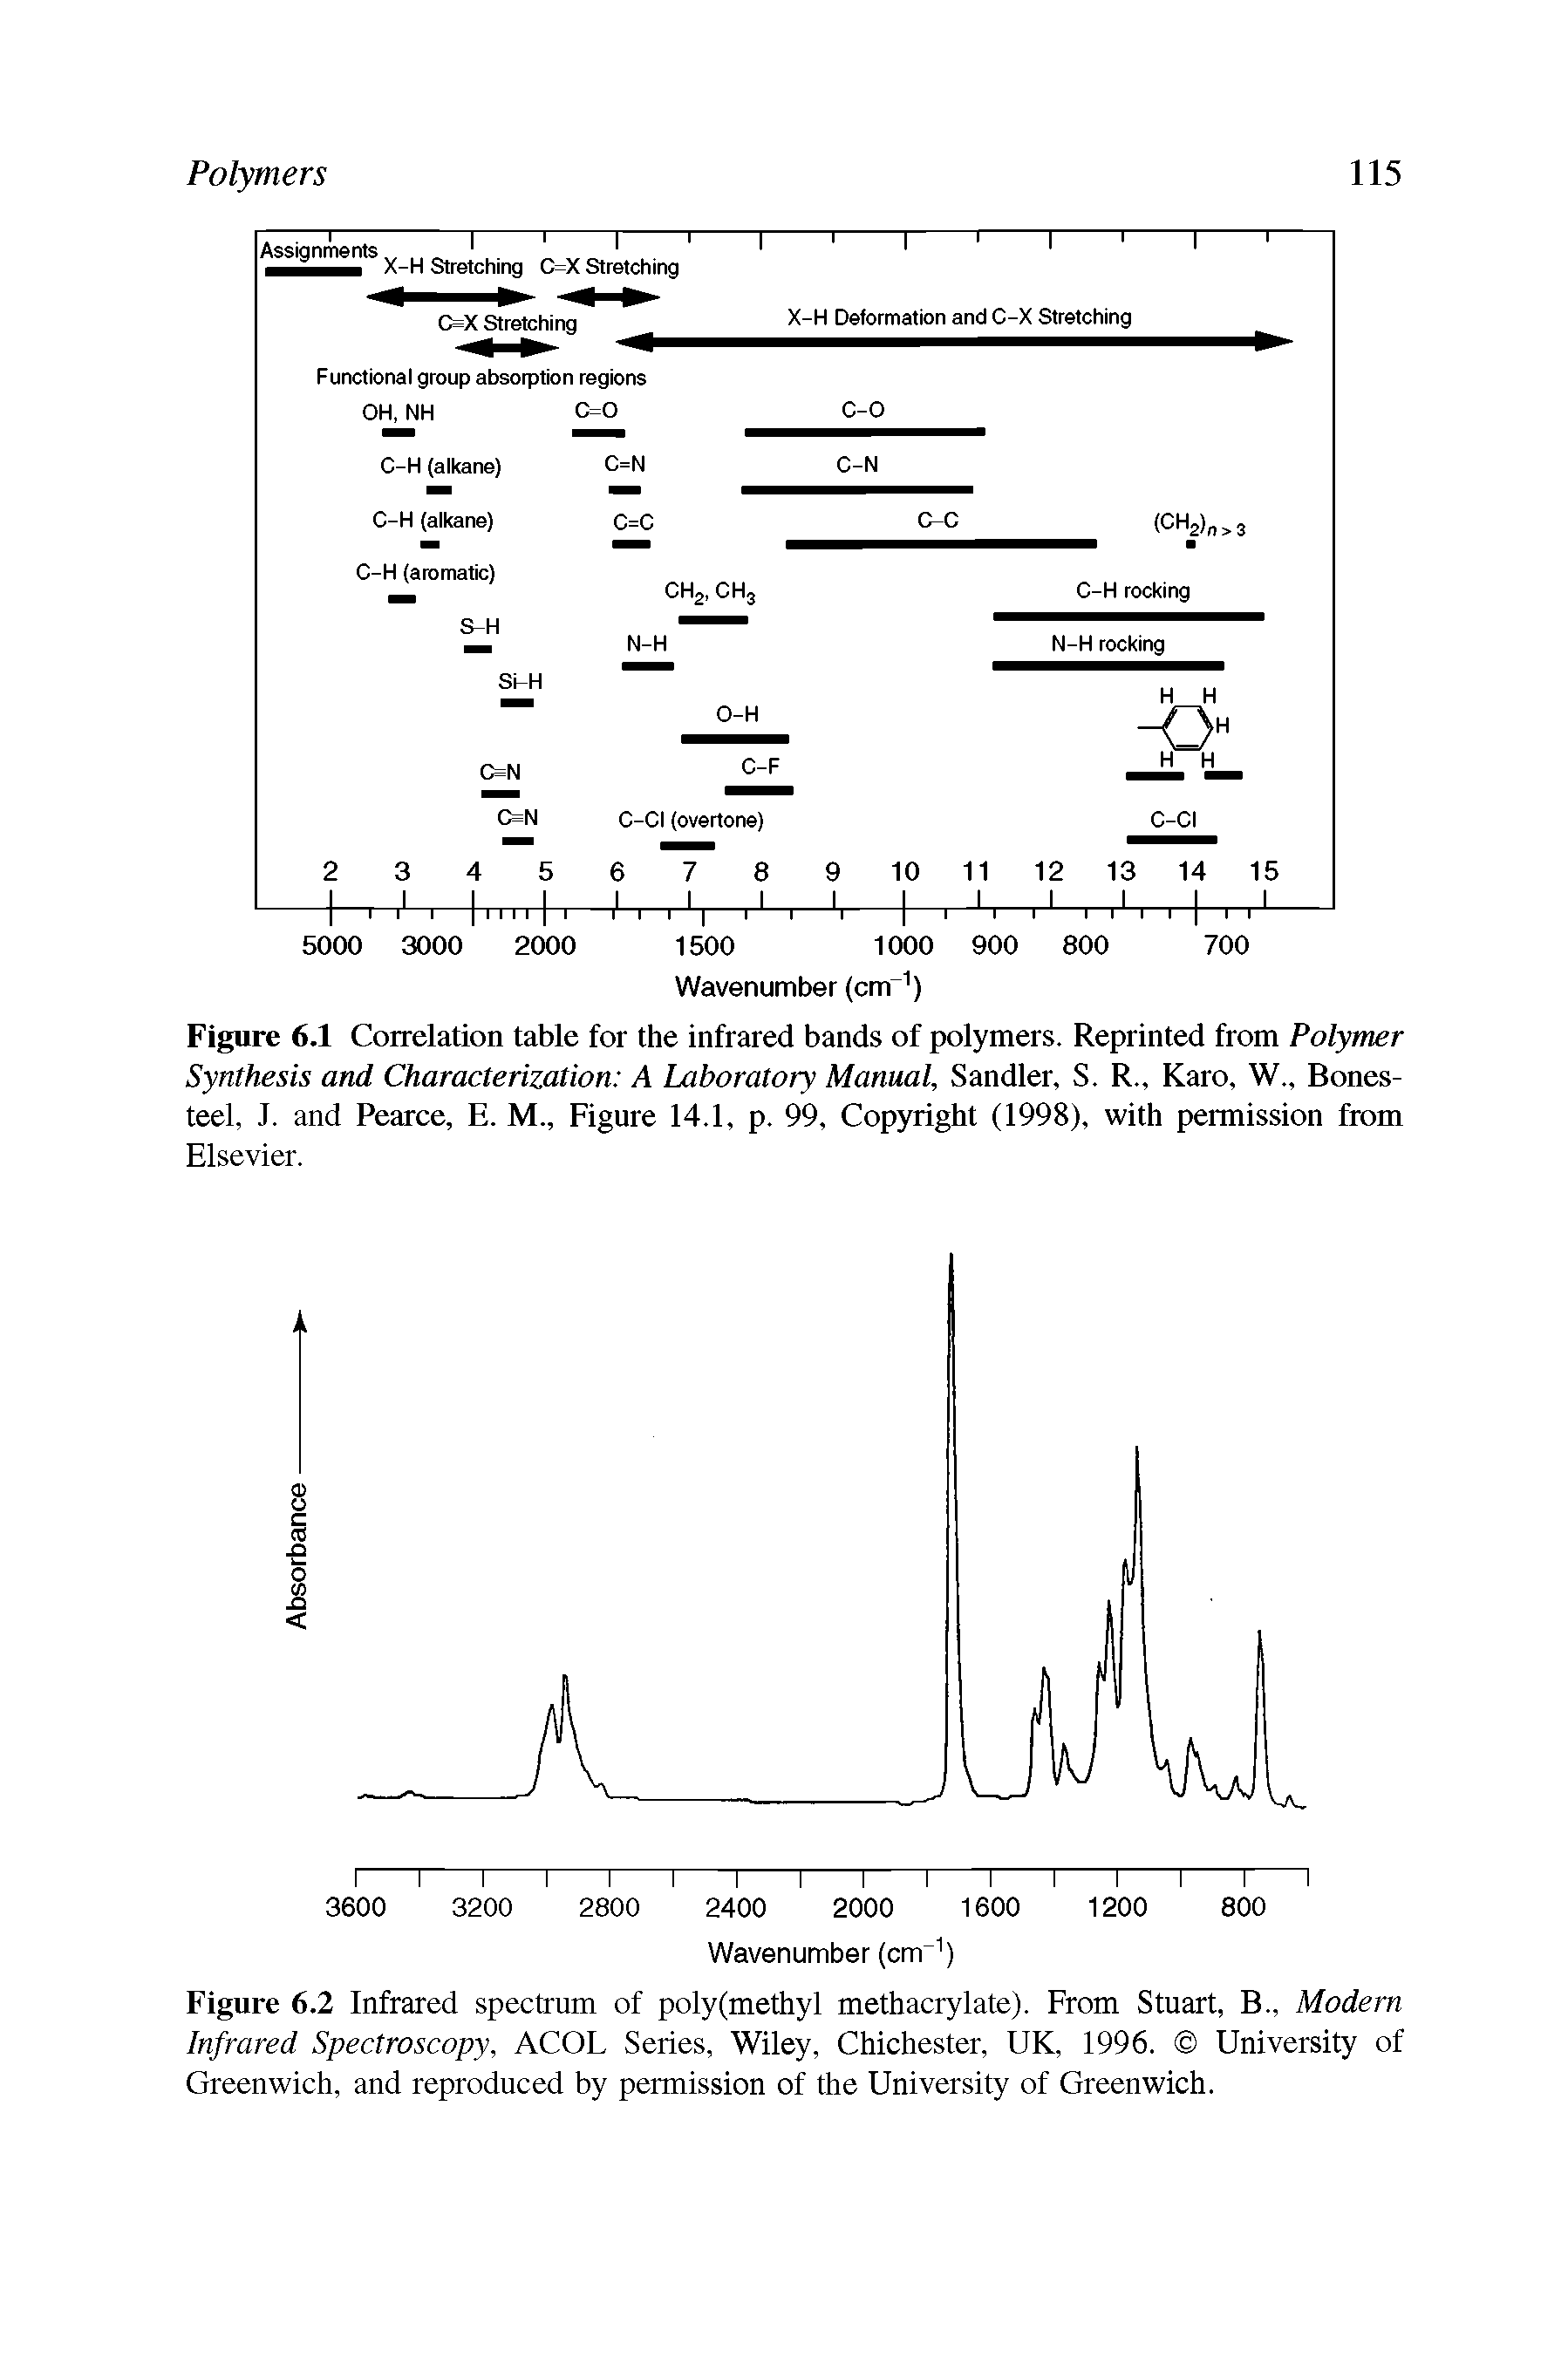 Figure 6.2 Infrared spectrum of poly(methyl methacrylate). From Stuart, B., Modern Infrared Spectroscopy, ACOL Series, Wiley, Chichester, UK, 1996. University of Greenwich, and reproduced by permission of the University of Greenwich.